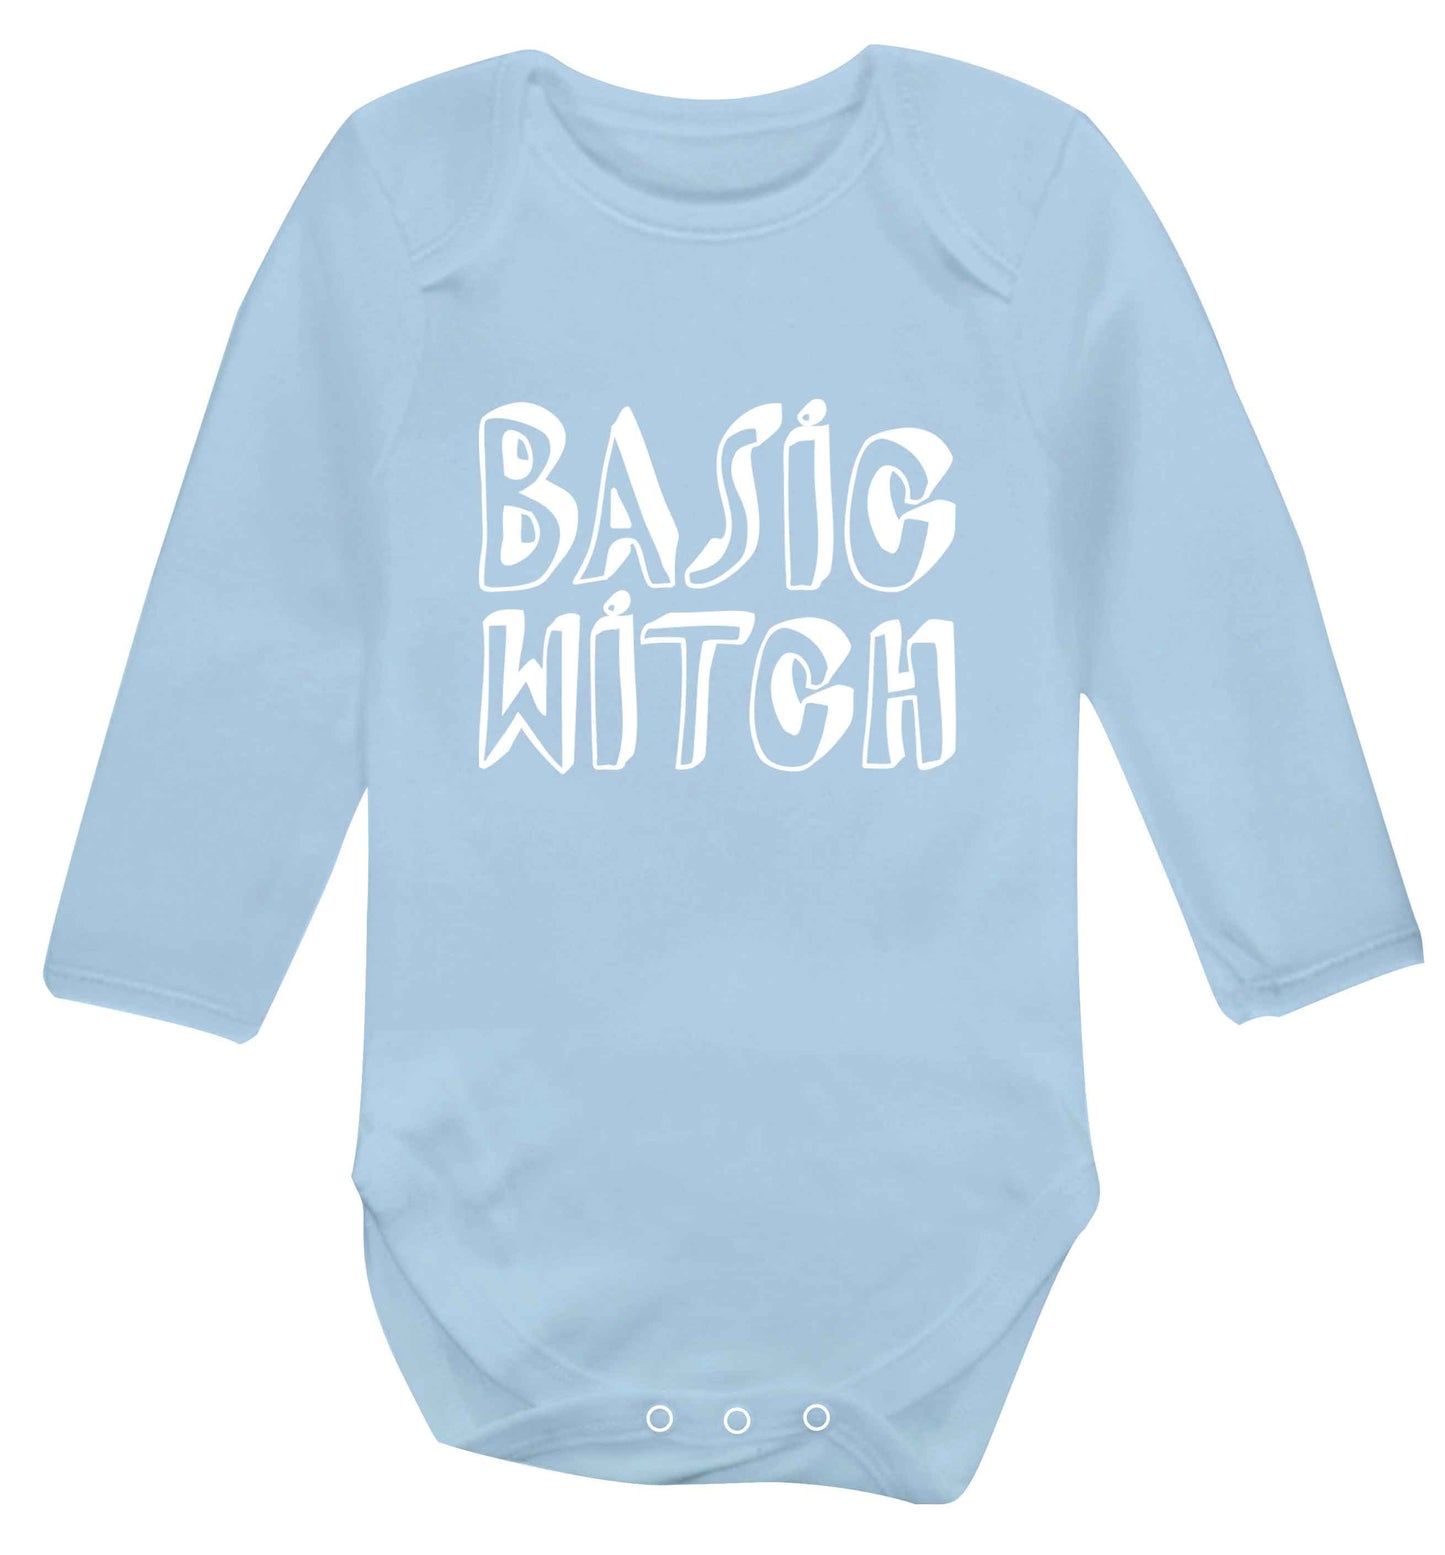 Basic witch baby vest long sleeved pale blue 6-12 months